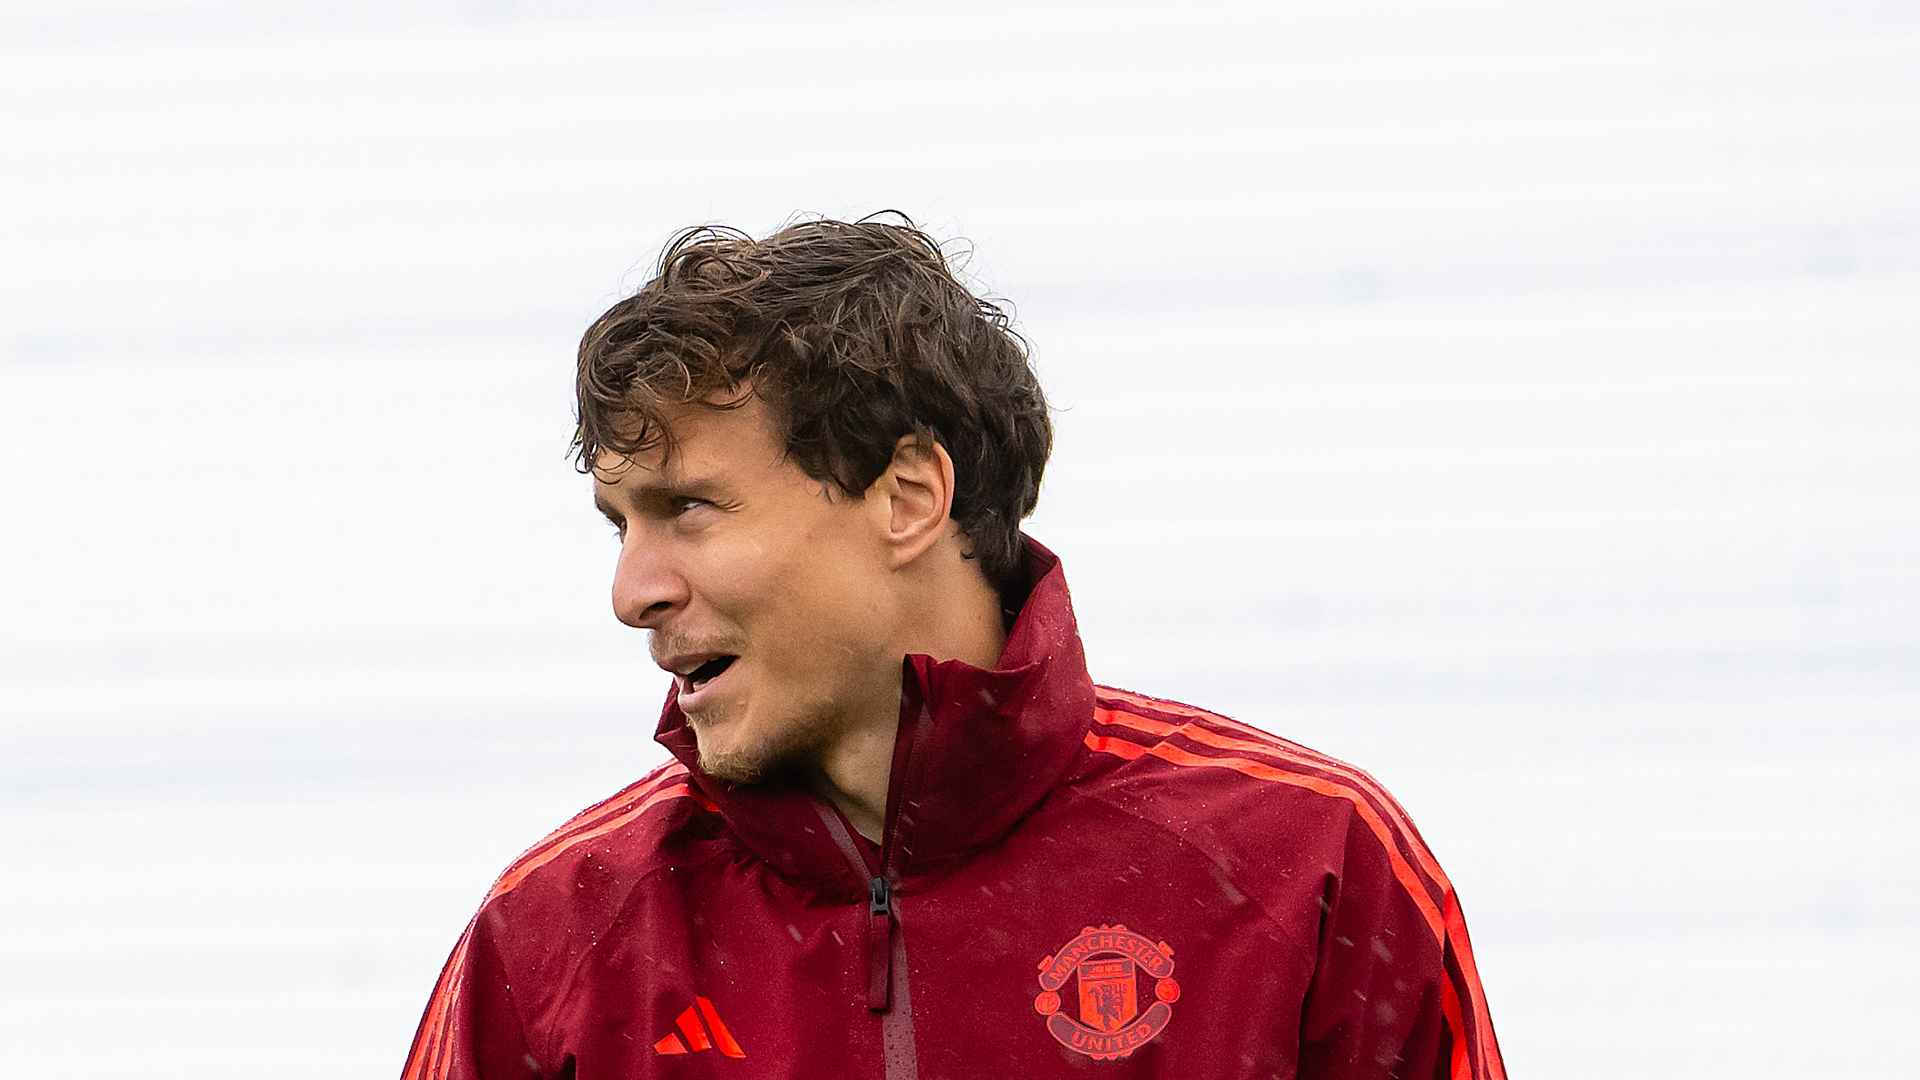 Training update from Carrington